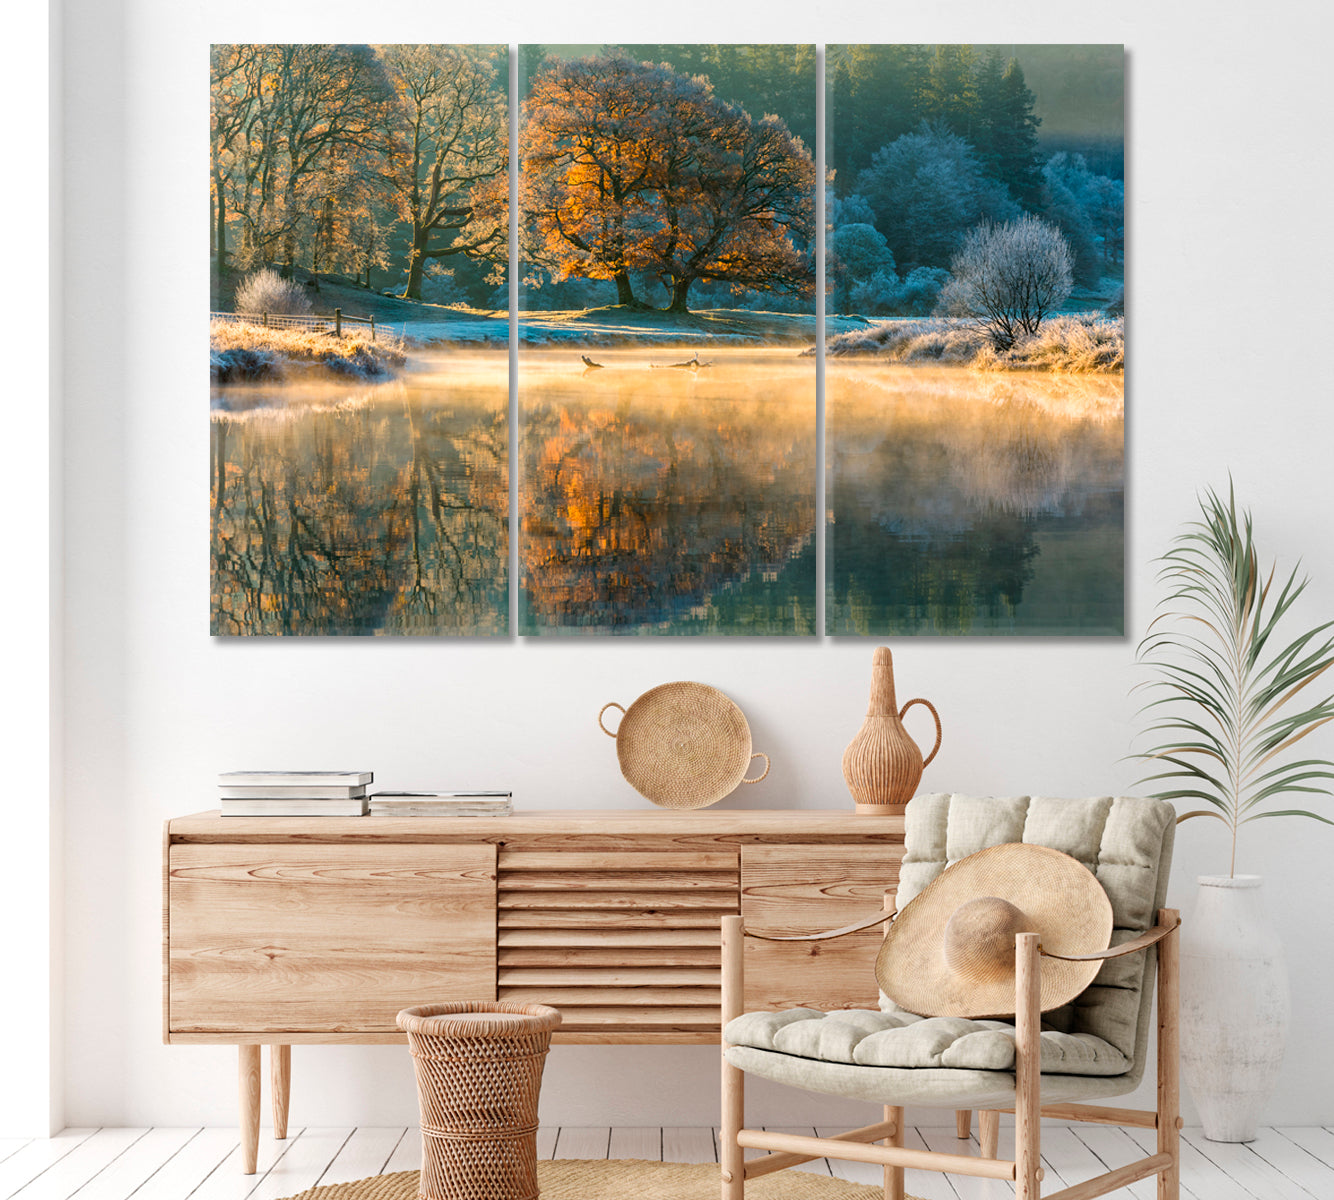 Lake of Elterwater England Canvas Print ArtLexy 3 Panels 36"x24" inches 